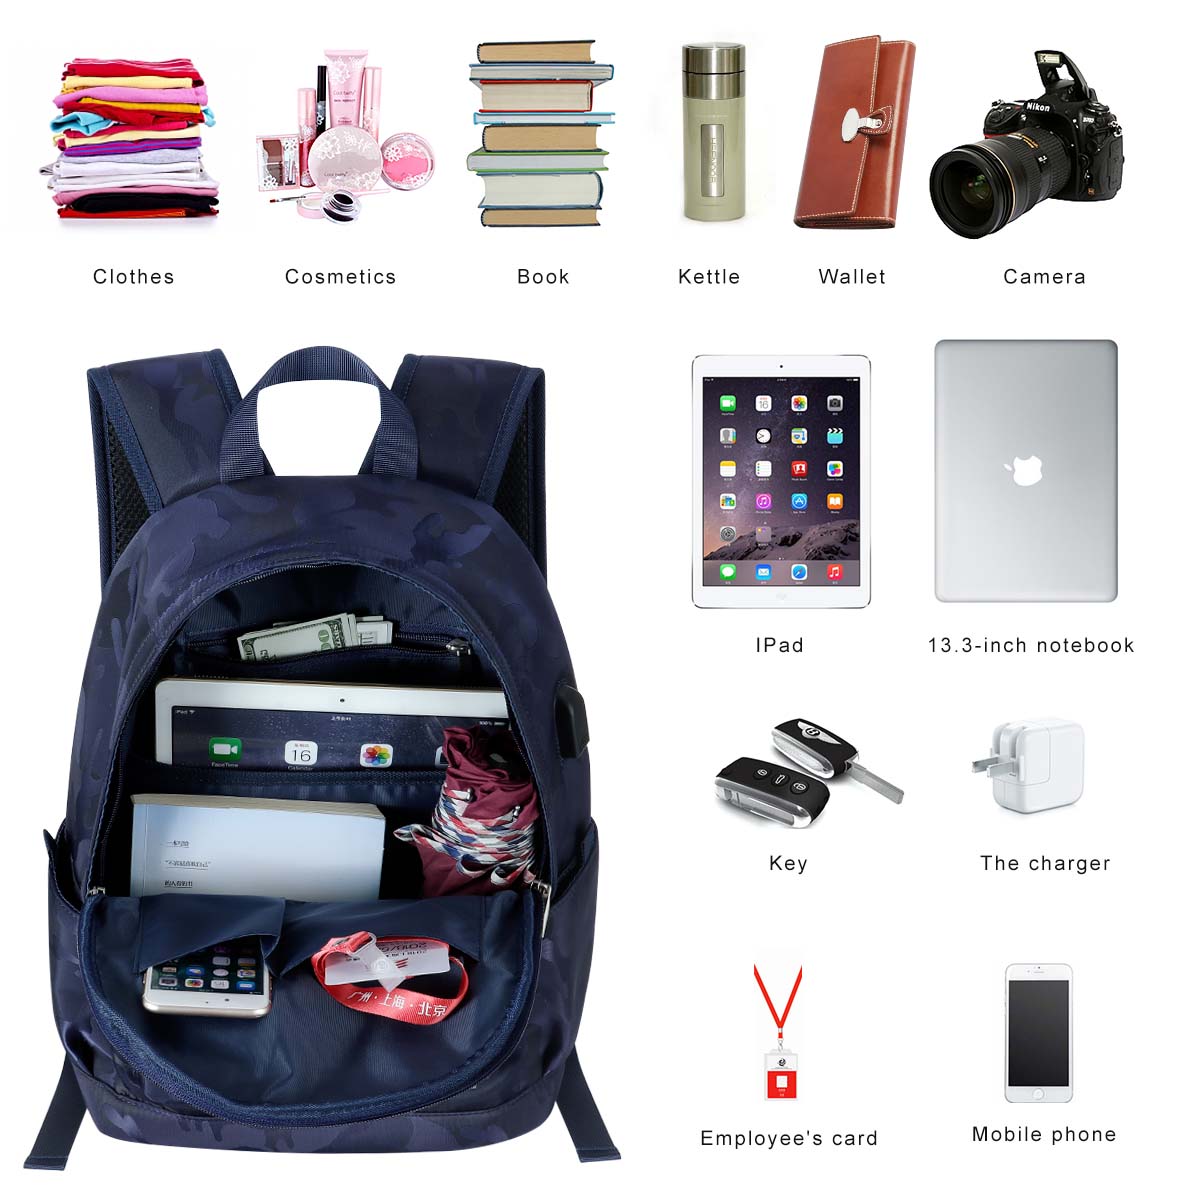 Laptop Backpack 13.3 Inch Stylish Computer Backpack School Backpack Casual Daypack Laptop Bag Water Repellent canvas Business Bag Tablet With USB Port for Travel/Business/College/Women/Men/students - image 5 of 6